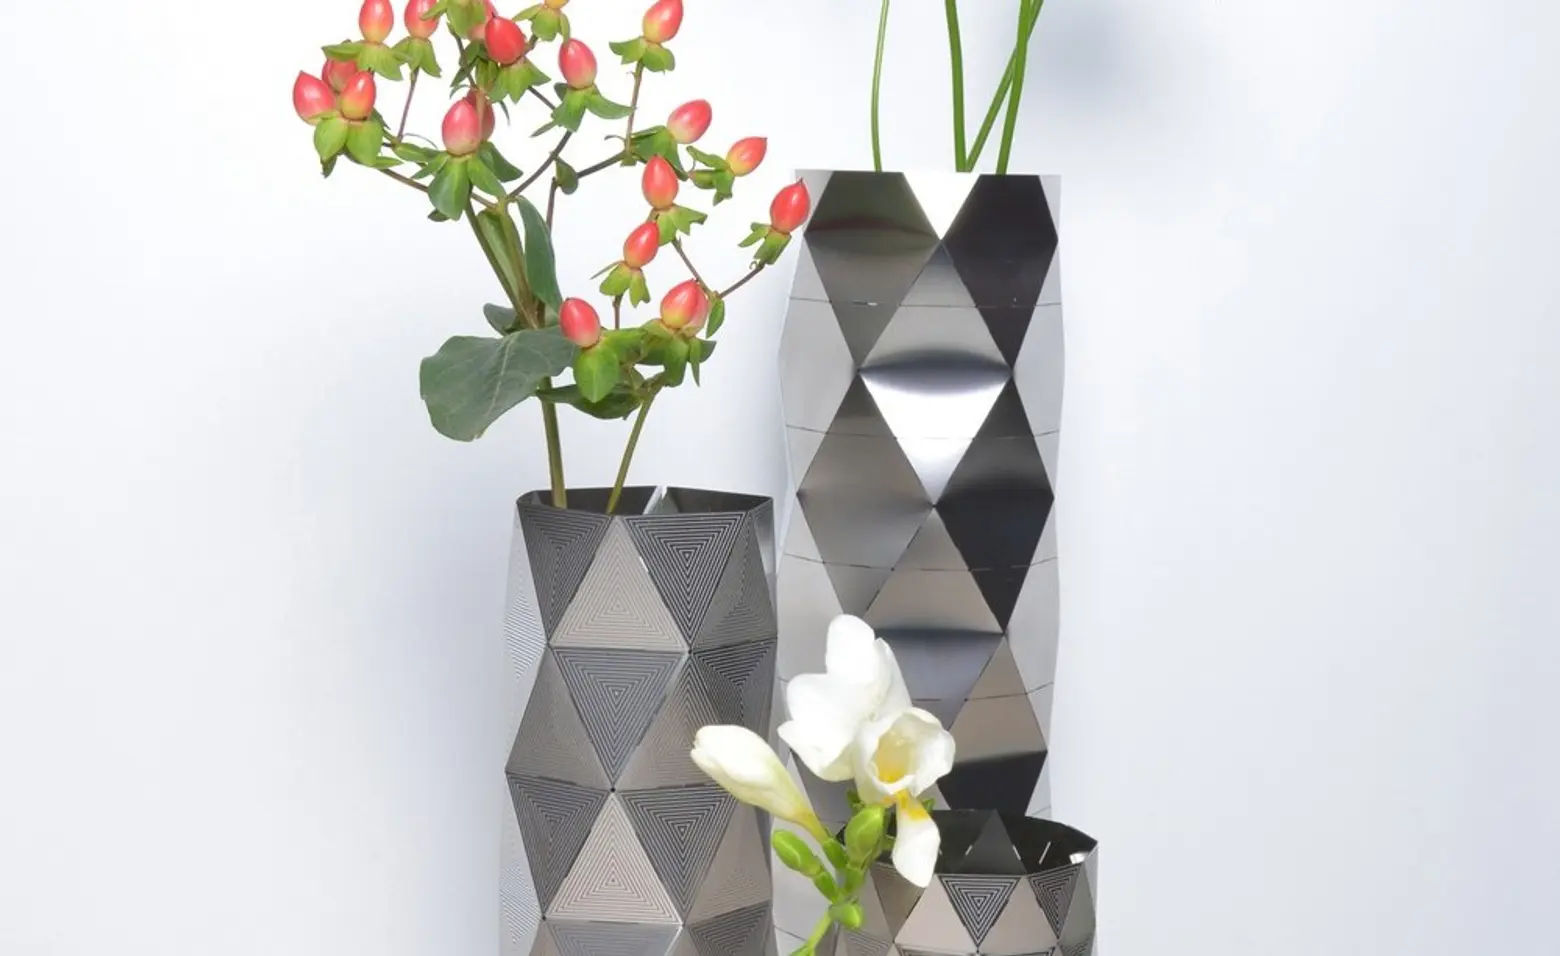 Another Studio’s Convert Vase Collection is Inspired by Architectural Geometry